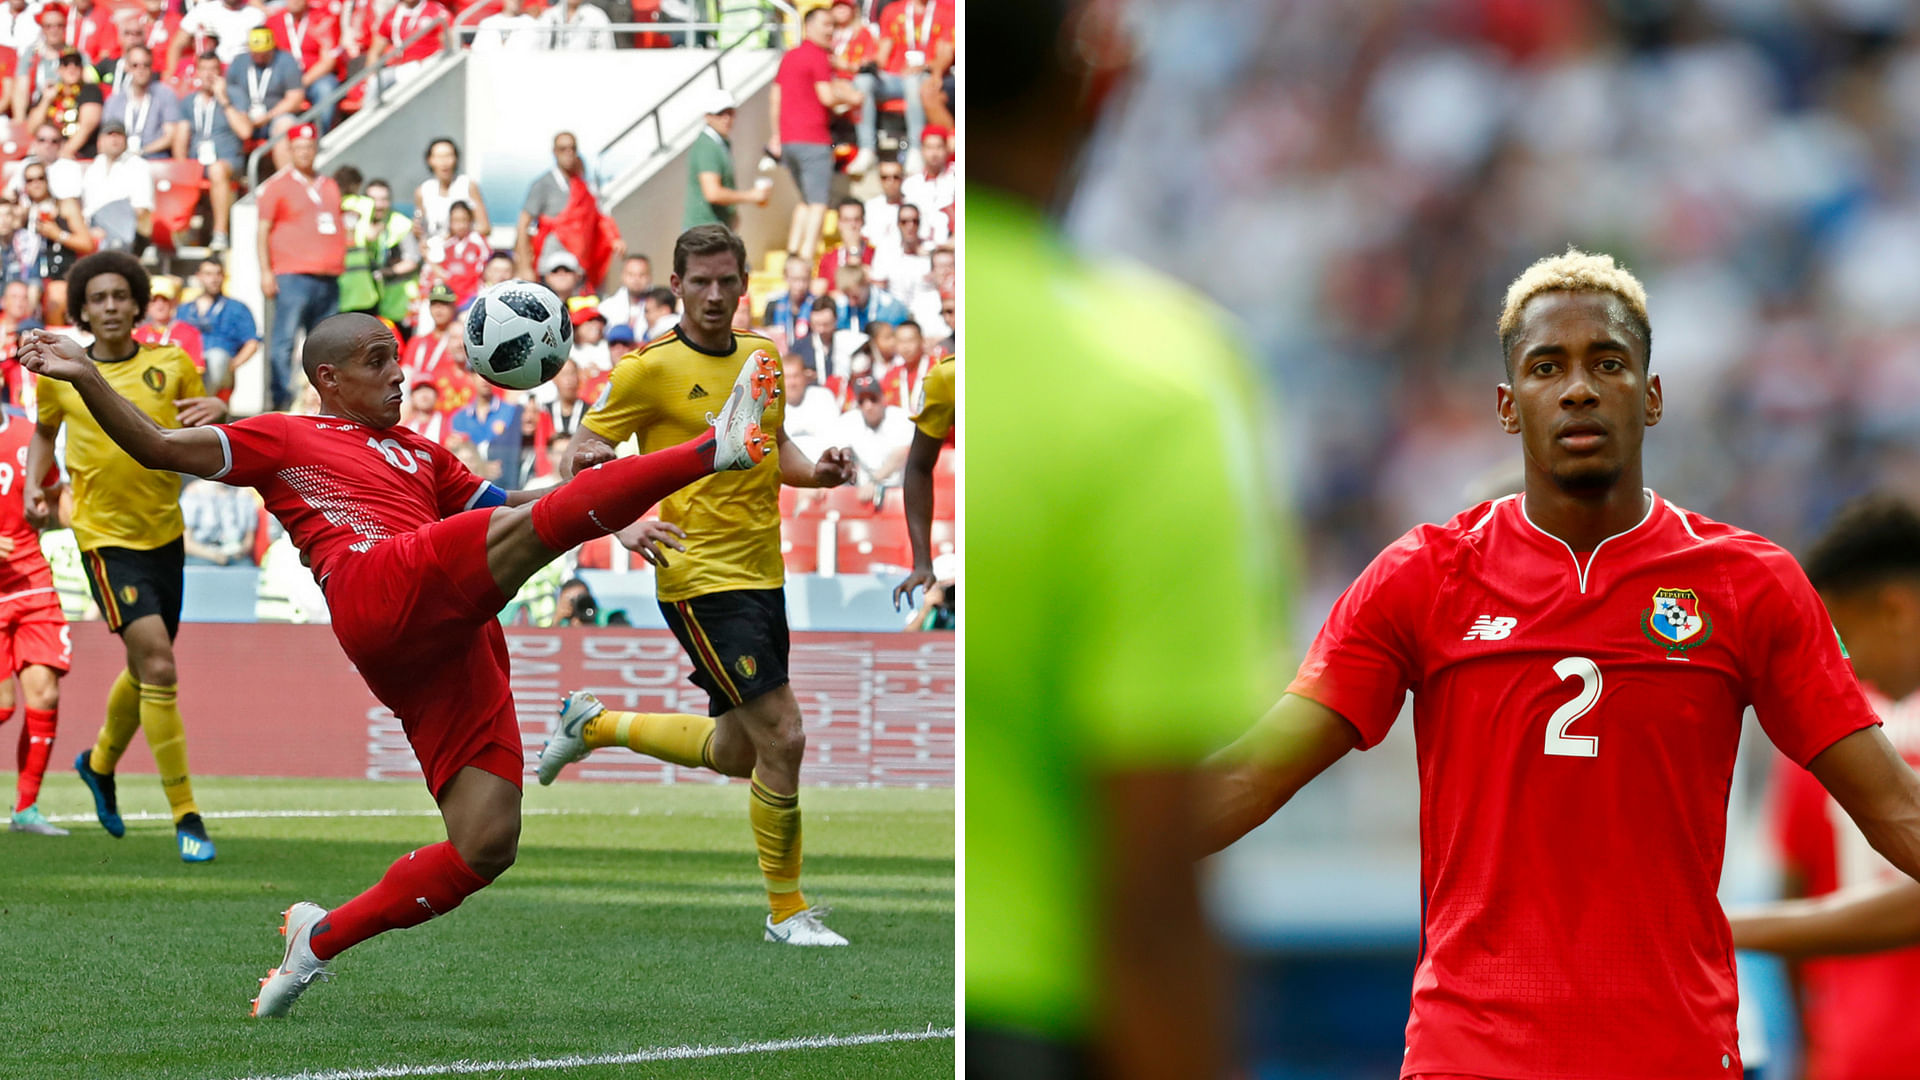 Tunisia (Left) and Panama (Right) at the FIFA World Cup 2018